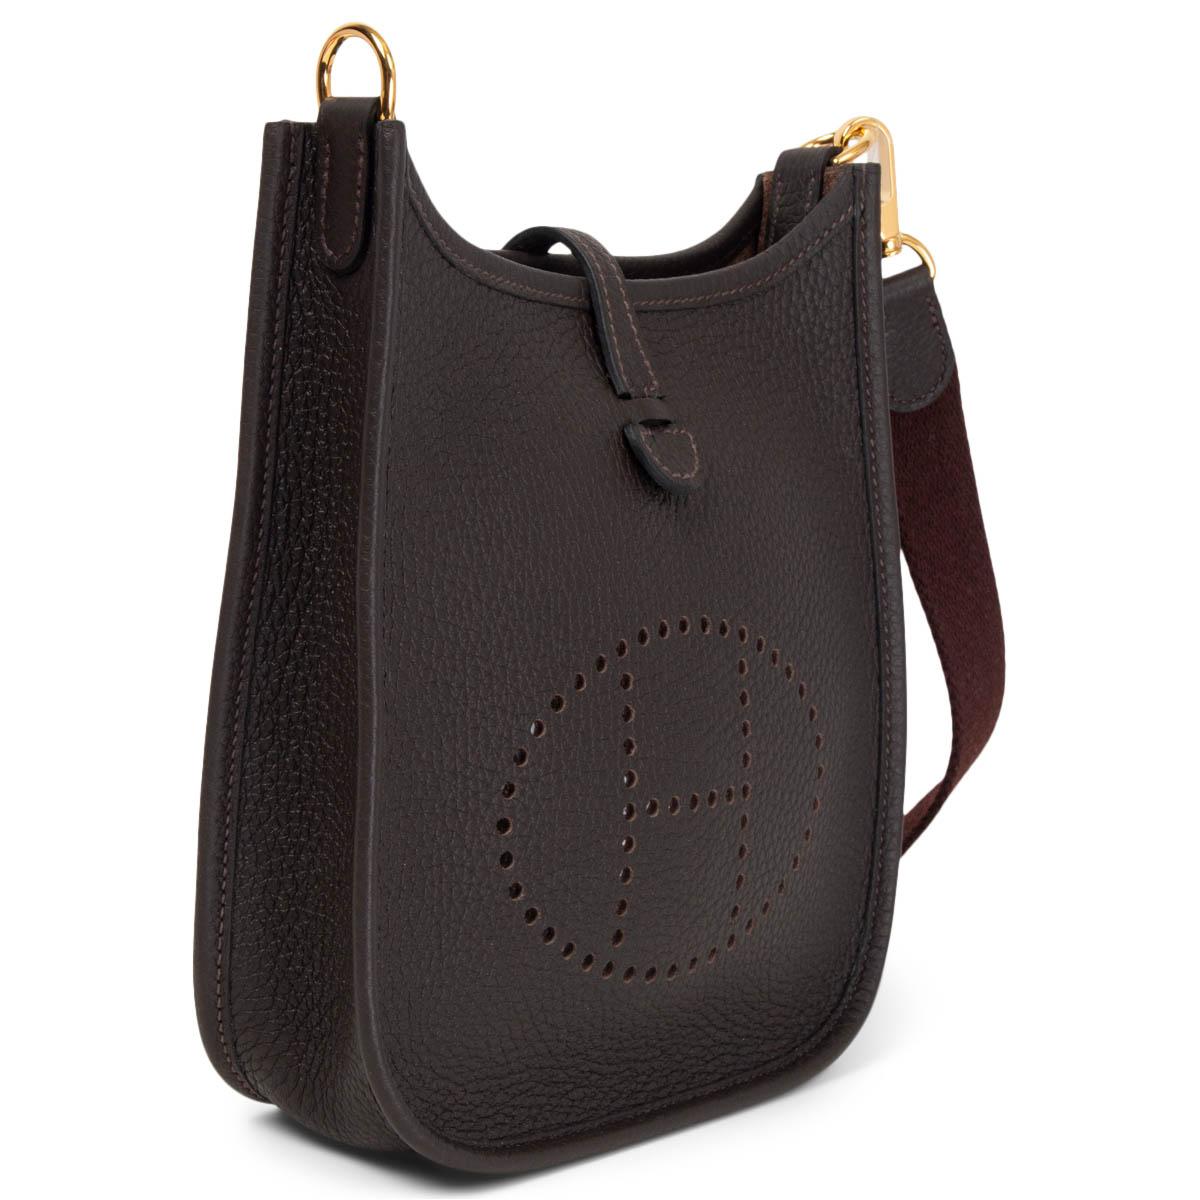 100% authentic Hermès Evelyne 16 Amazone crossbody bag in Ebene (dark brown) Taurillon Clemence leather with a Havane brown wool sangle strap, perforated leather 